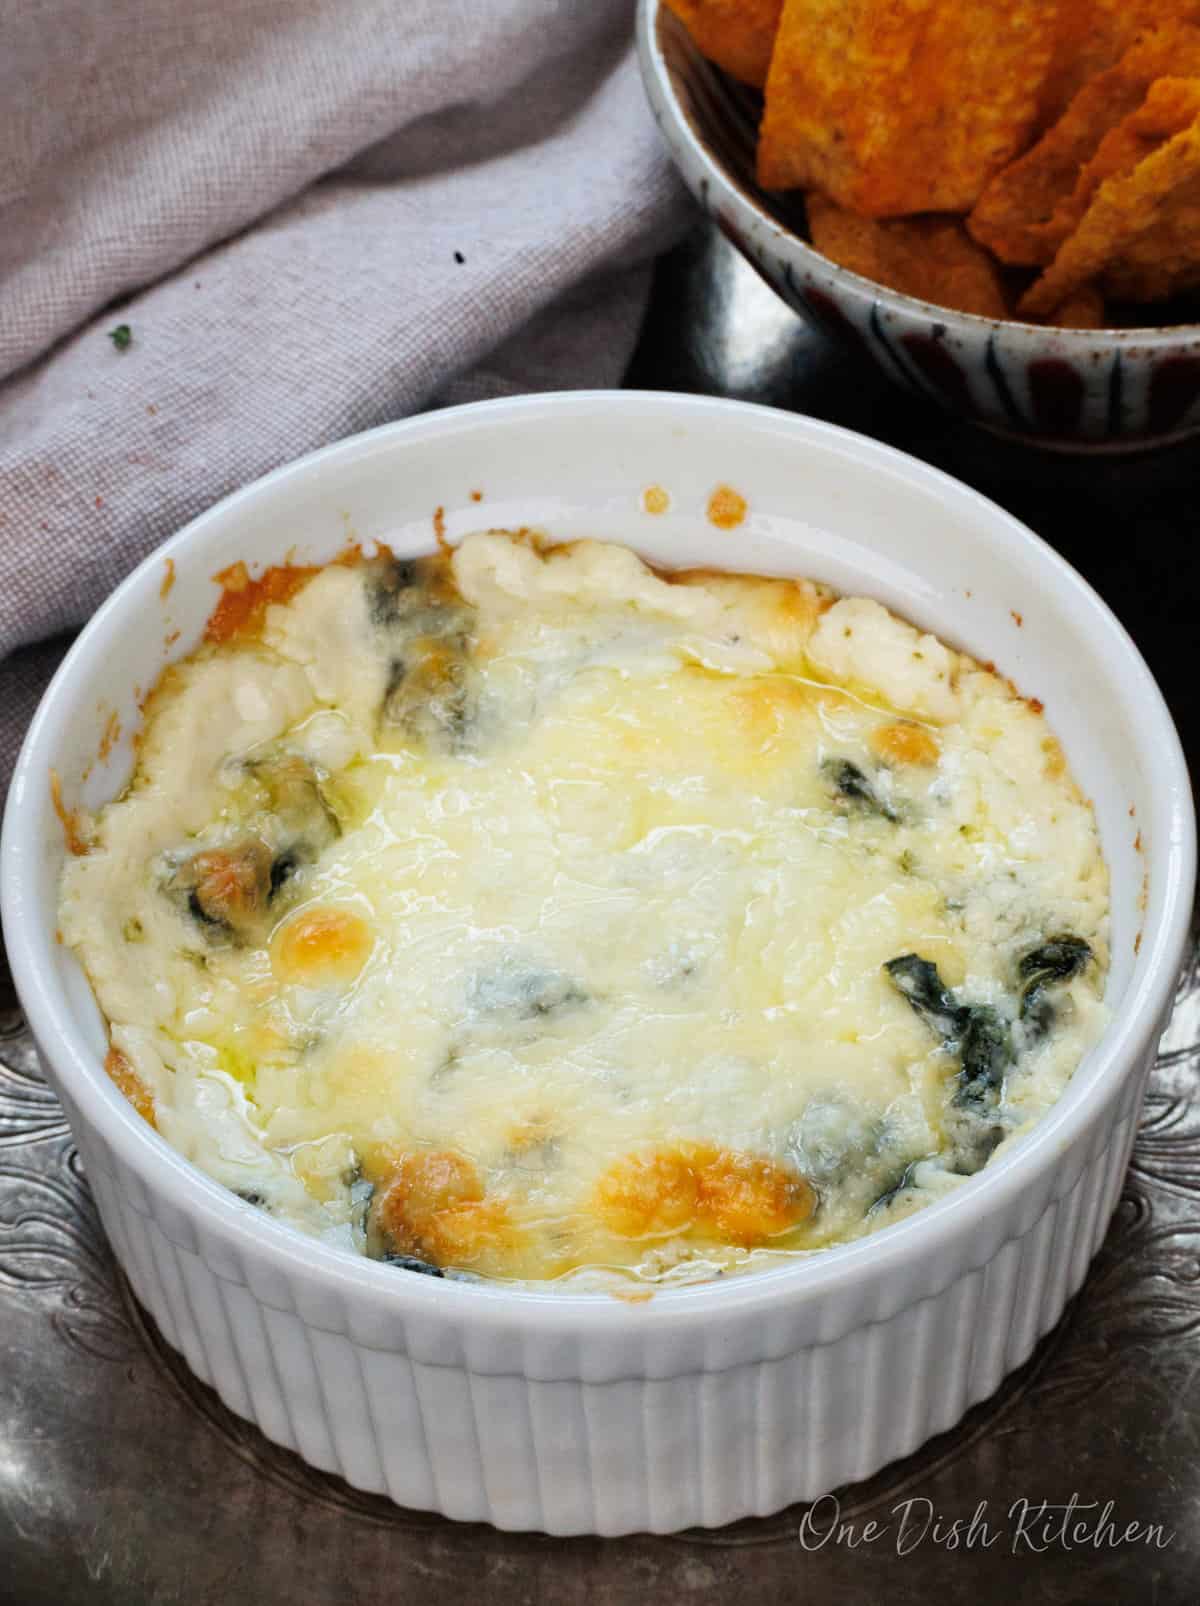 a small hot spinach dip in a bowl next to a plate of chips.